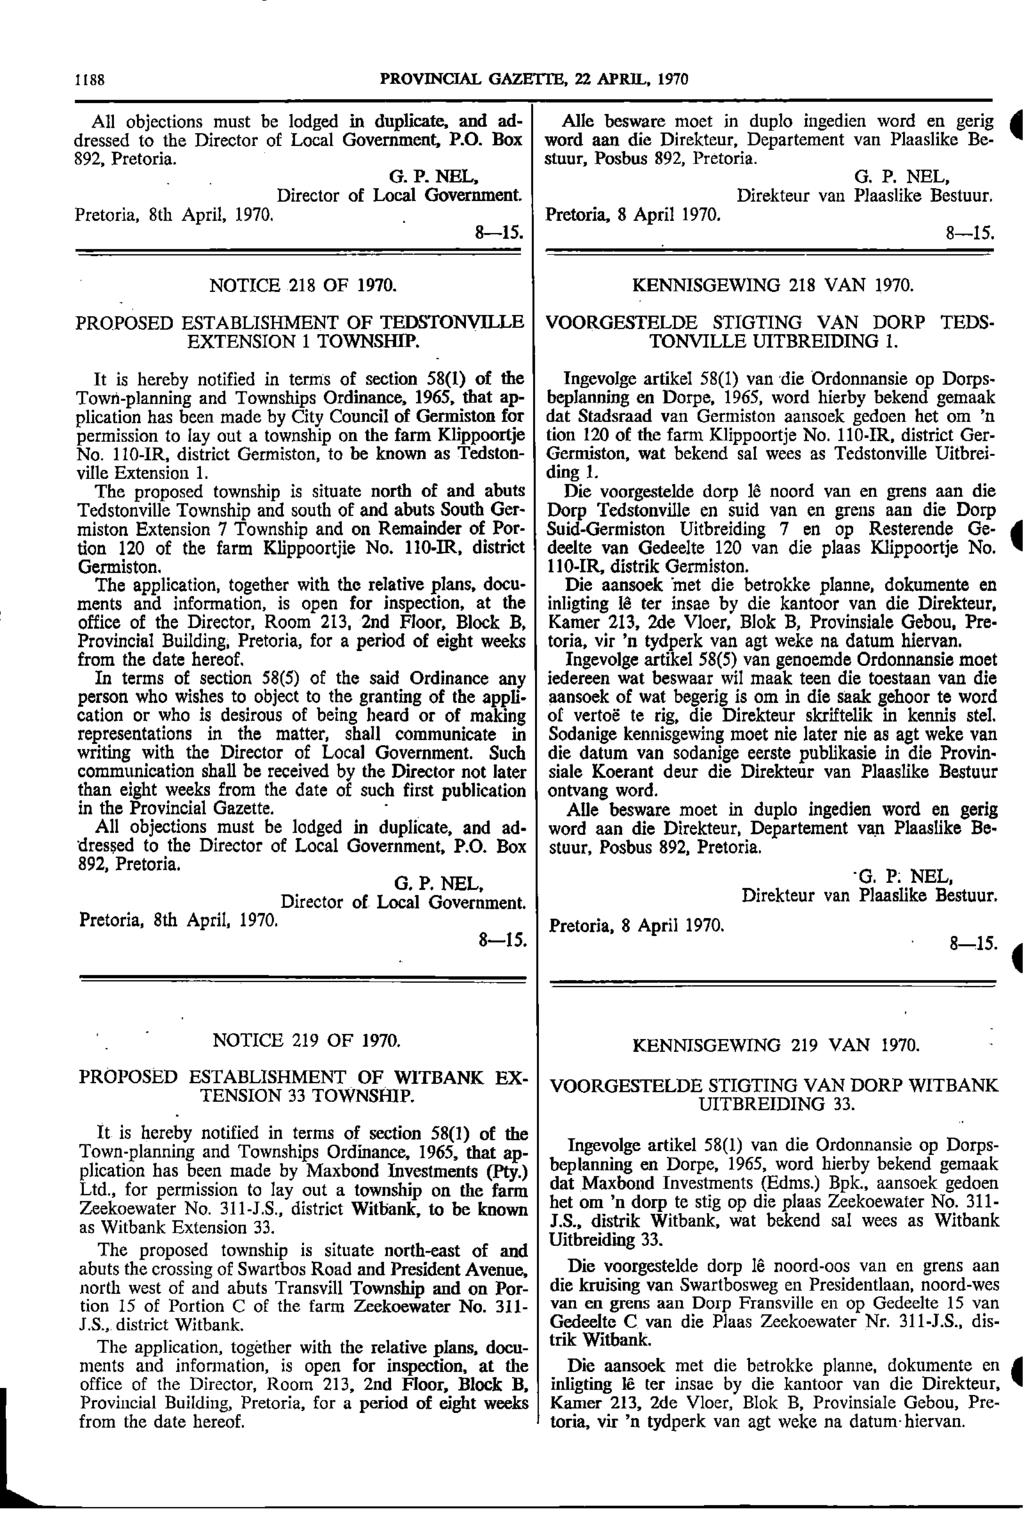 1188 PROVINCIAL GAZETTE 22 APRIL 1970 All objections must be lodged in duplicate and ad Alle besware moet in duplo ingedien word en gerig dressed to the Director of Local Government PO Box word aan